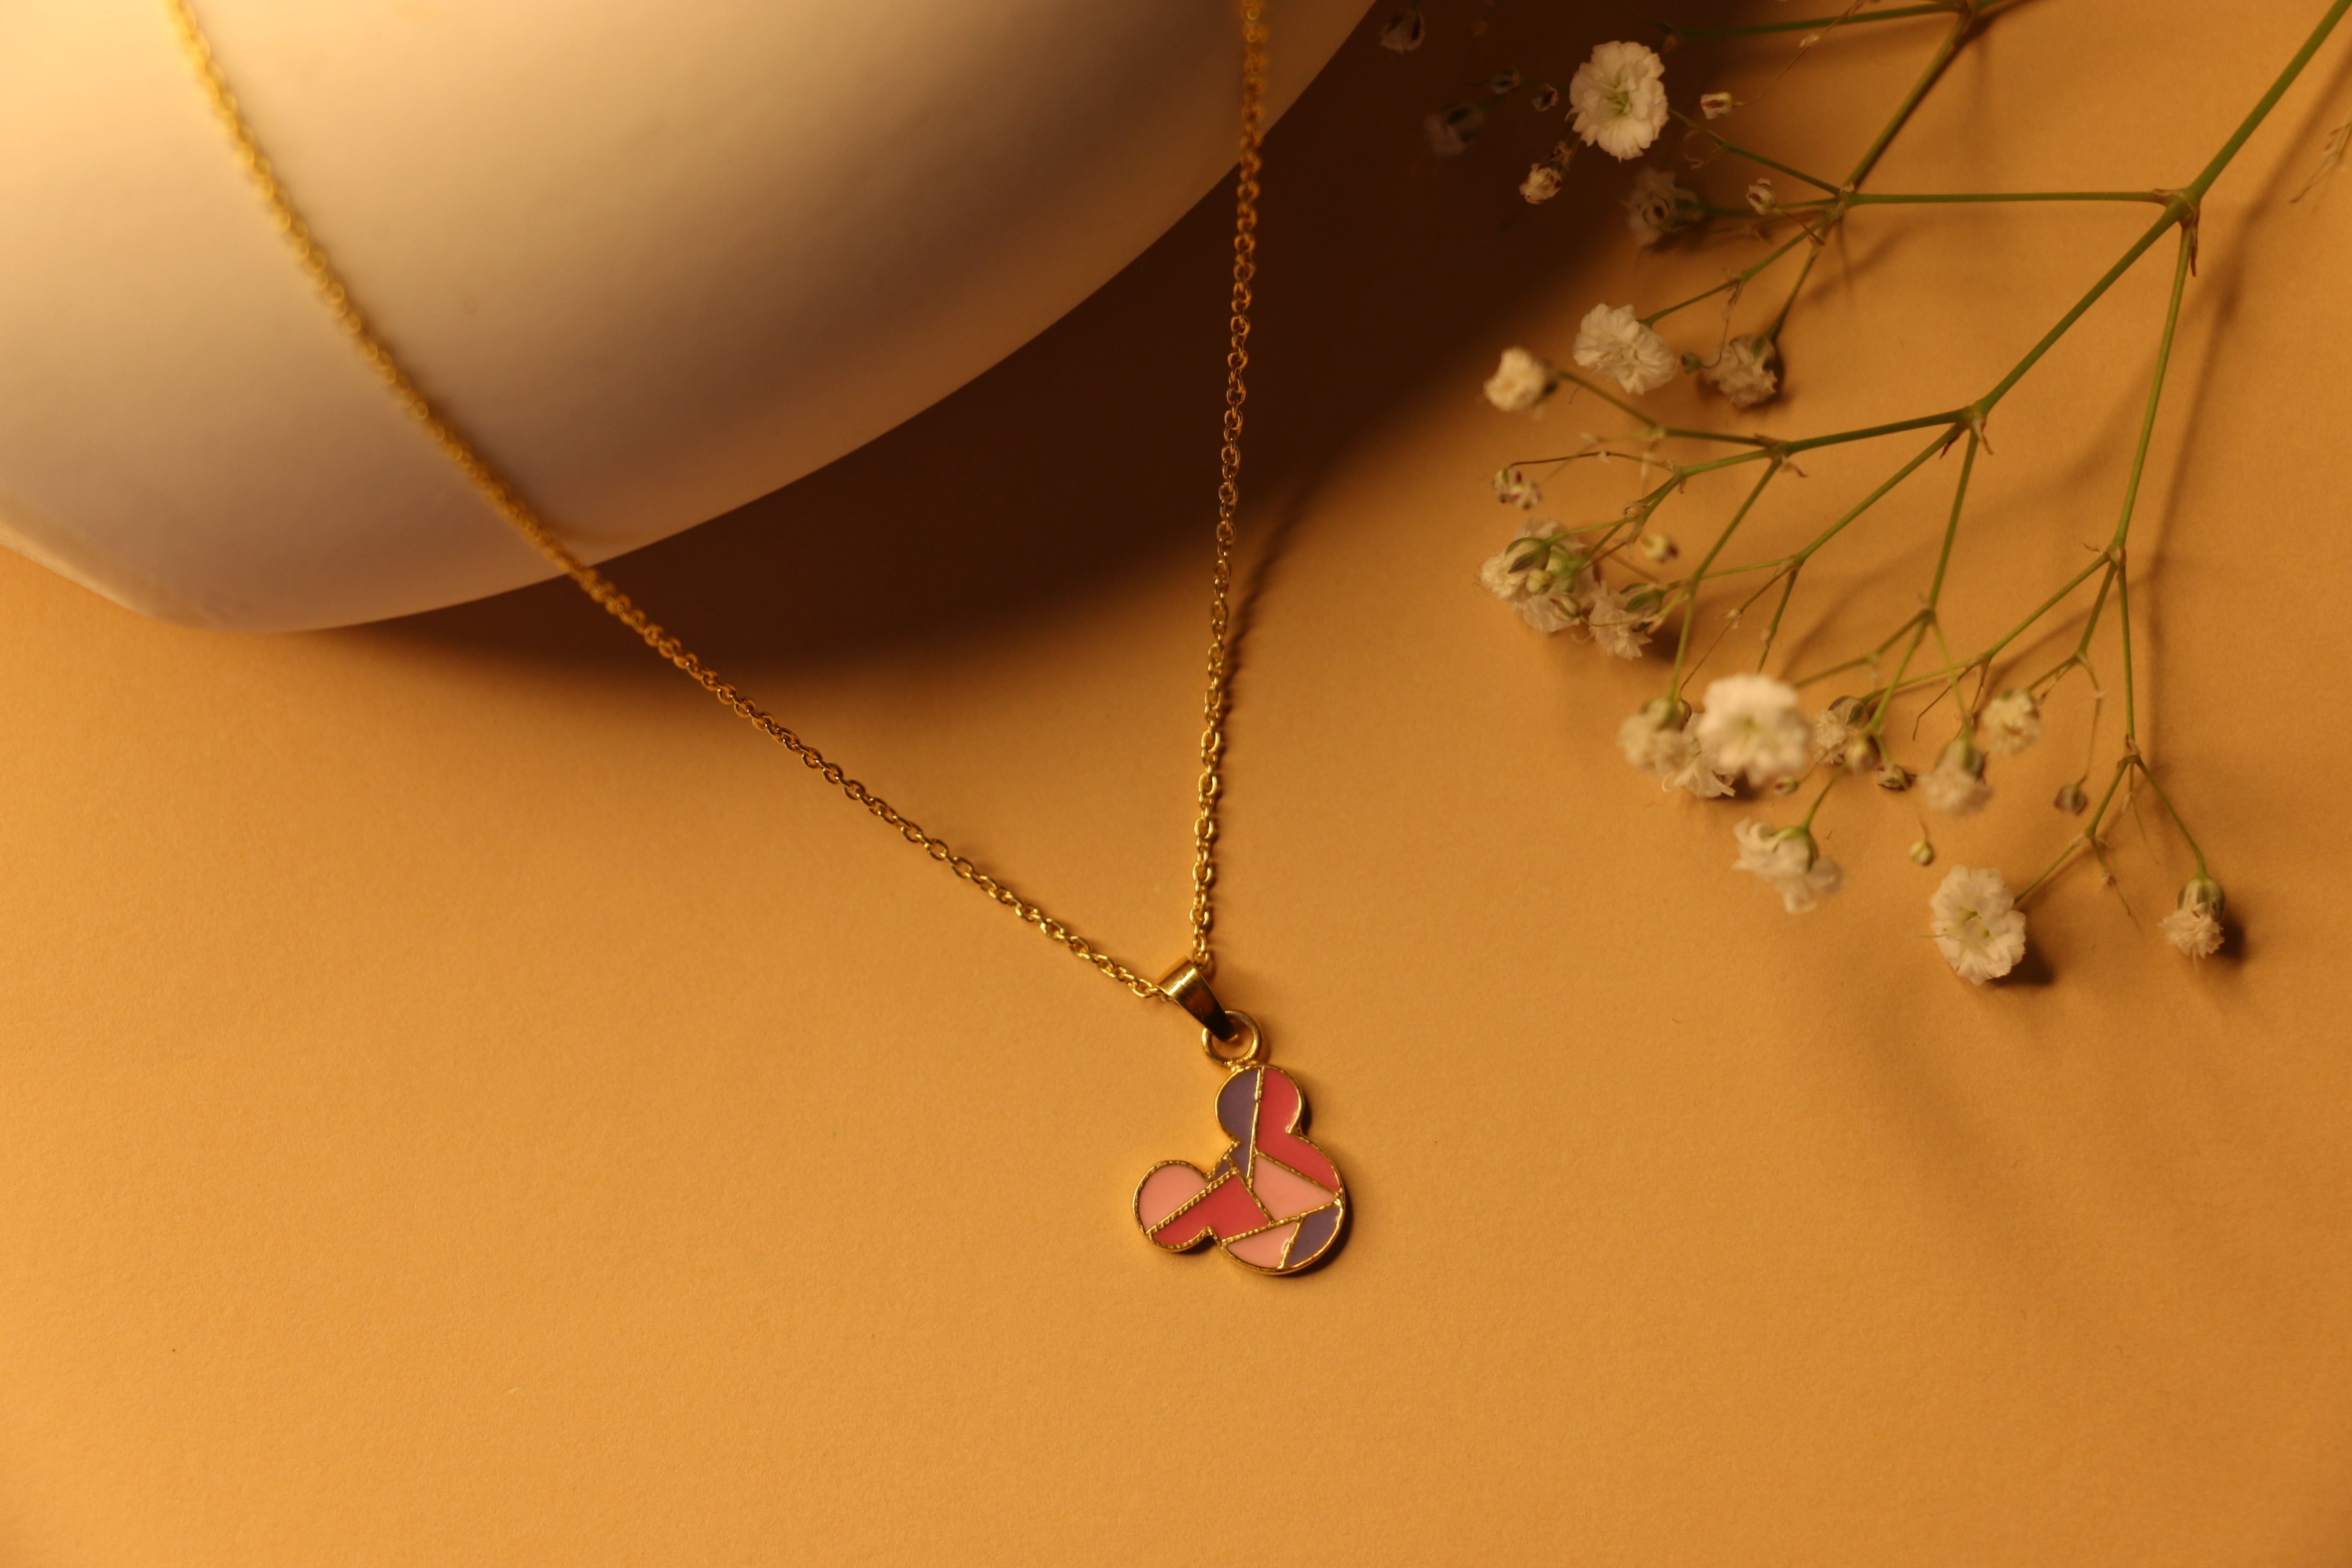 Mickey charm necklace